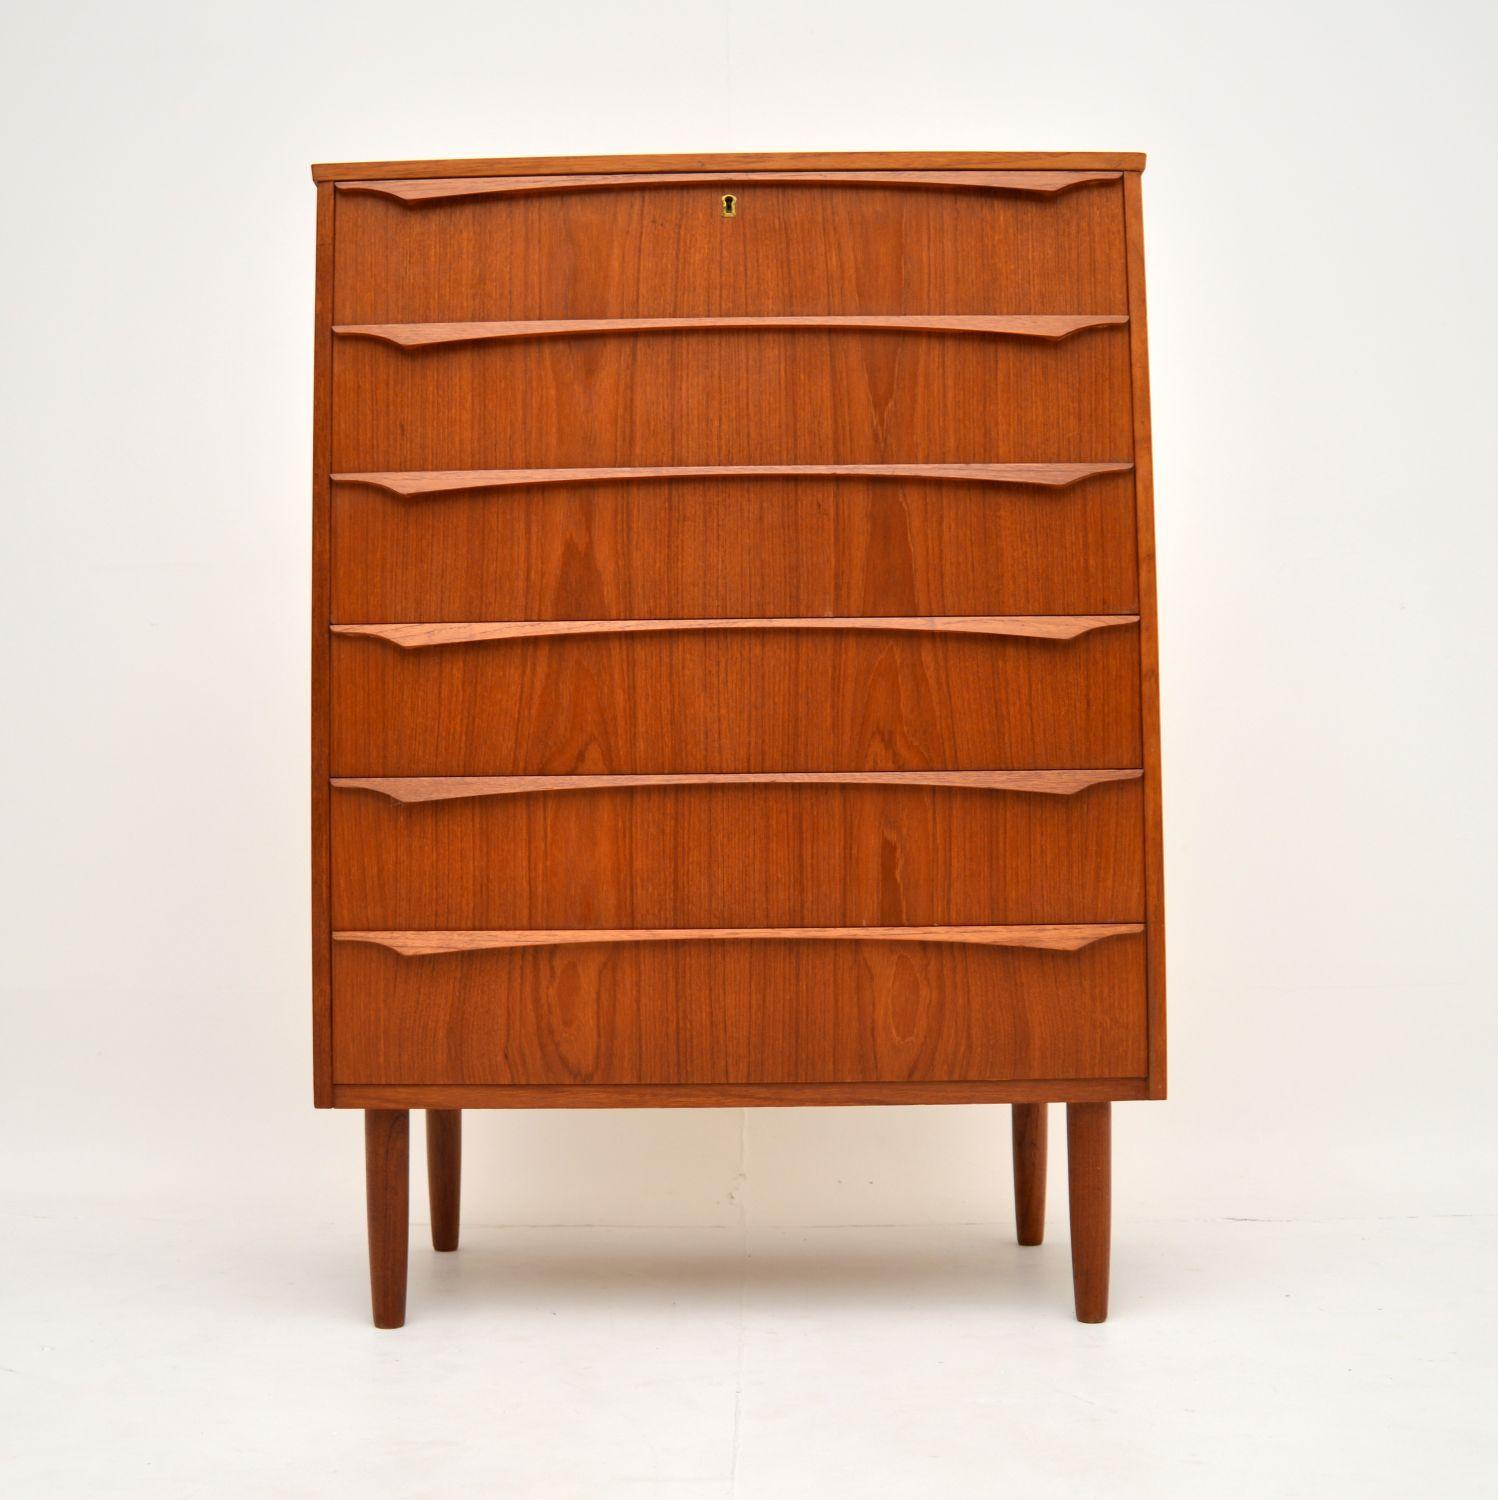 A stunning vintage Danish chest of drawers in teak. This was made in Denmark, it dates from the 1960’s.

It is beautifully designed, with a minimal and elegant look. This sits on beautifully tapered legs and has sculptural lipped handles. There is